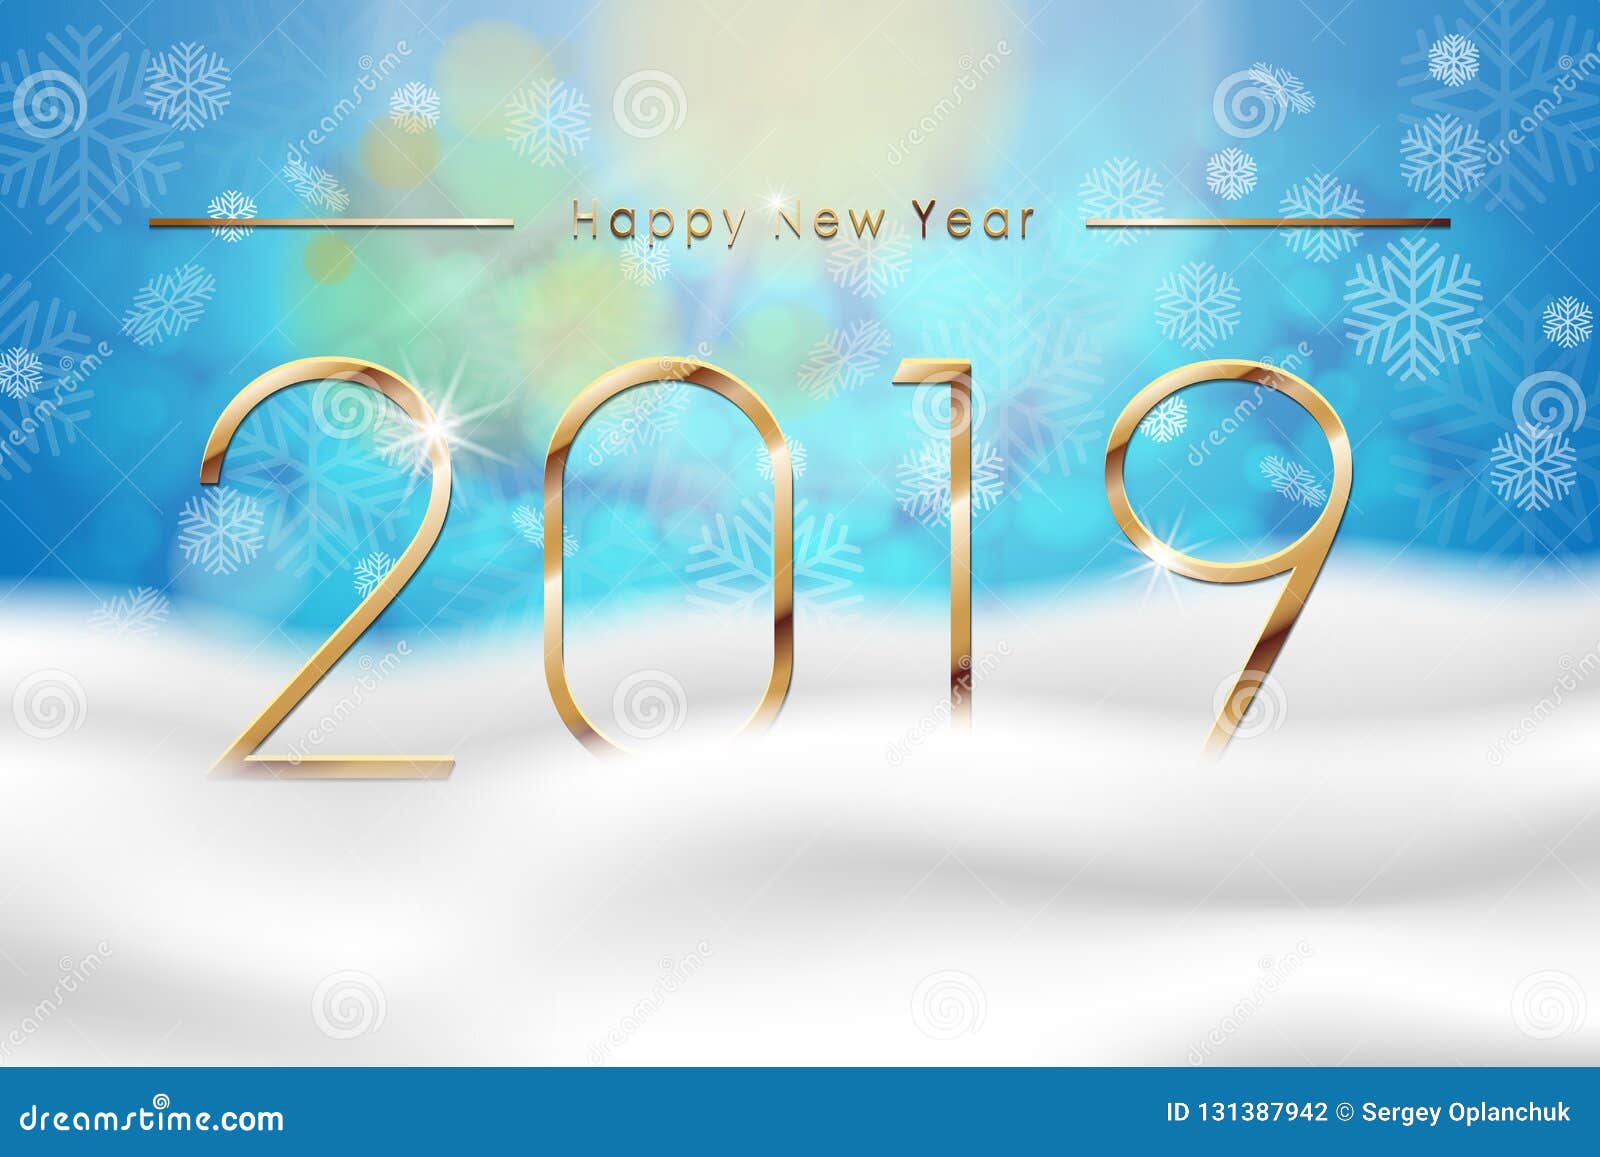 Happy New Year 2019 With Blue Winter Background With Snow